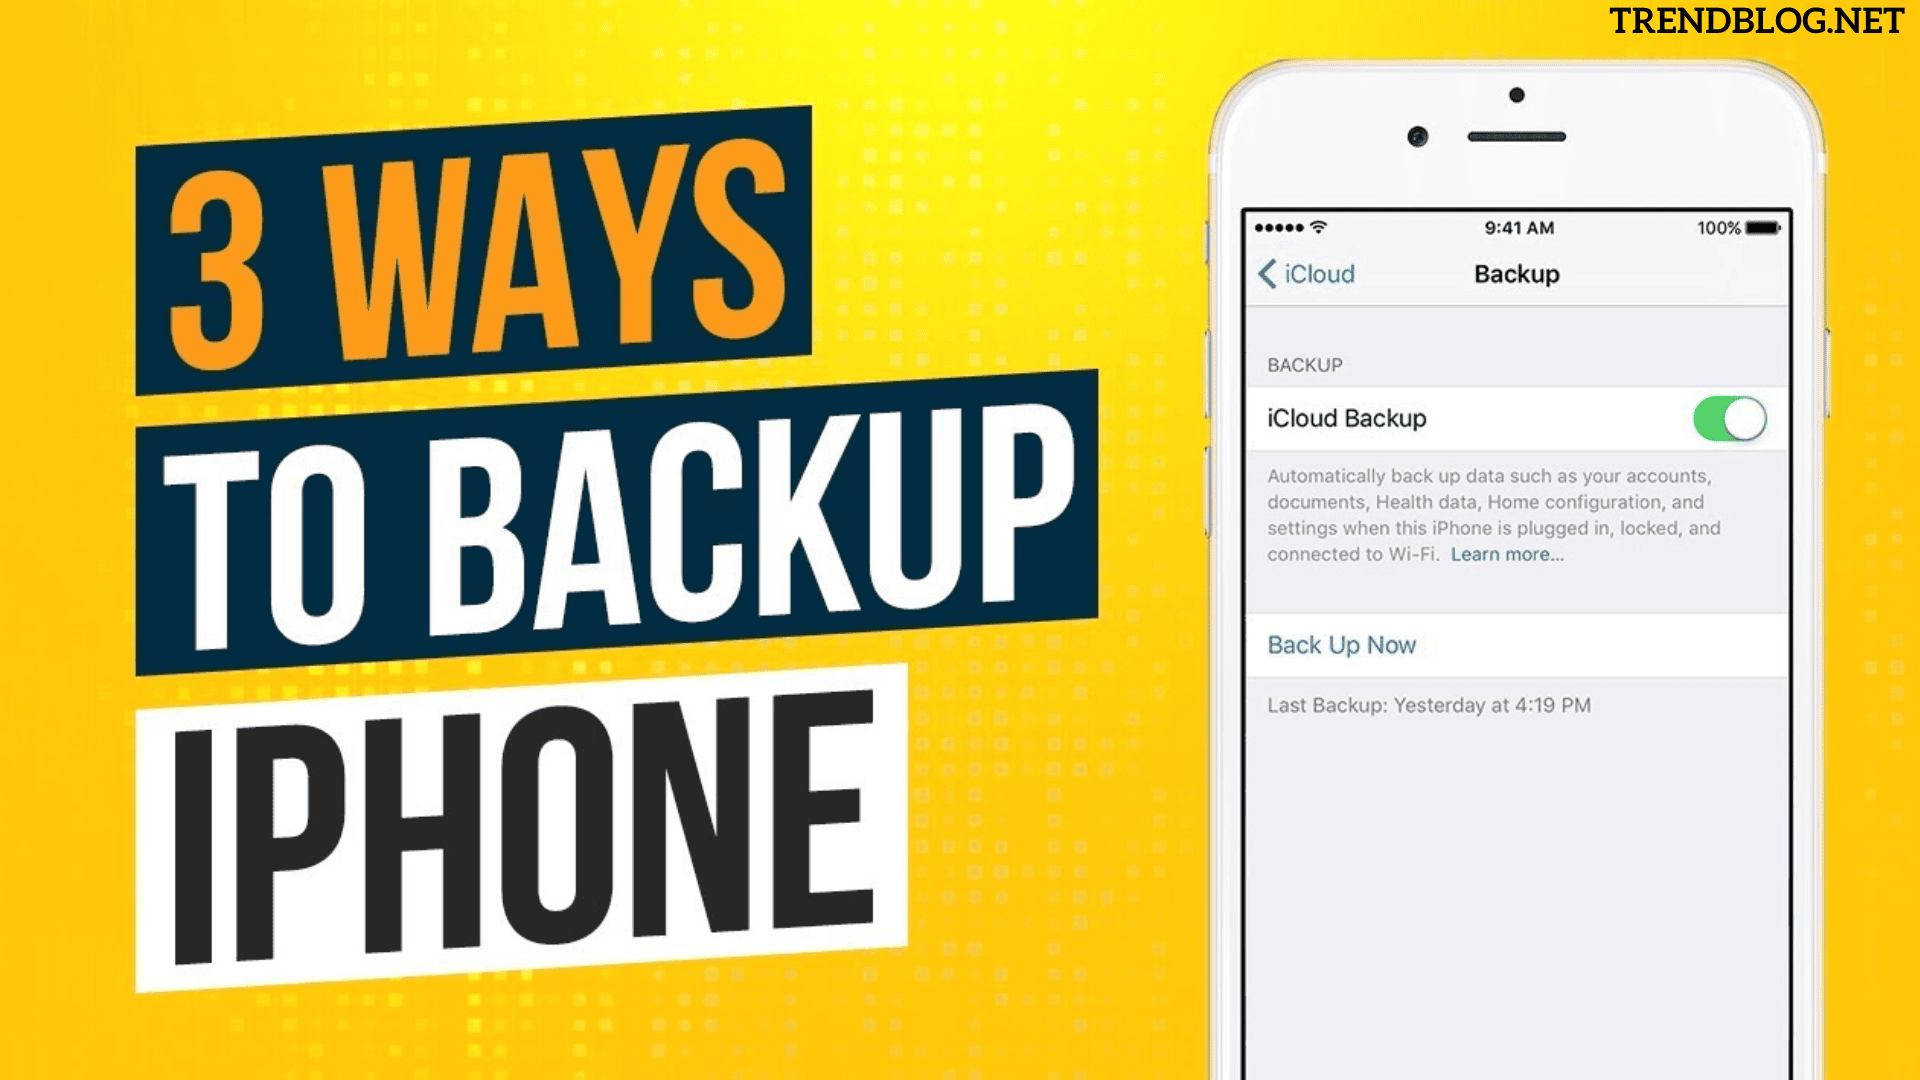  How to Backup iPhone With or Without iTunes in 3 Effective Ways